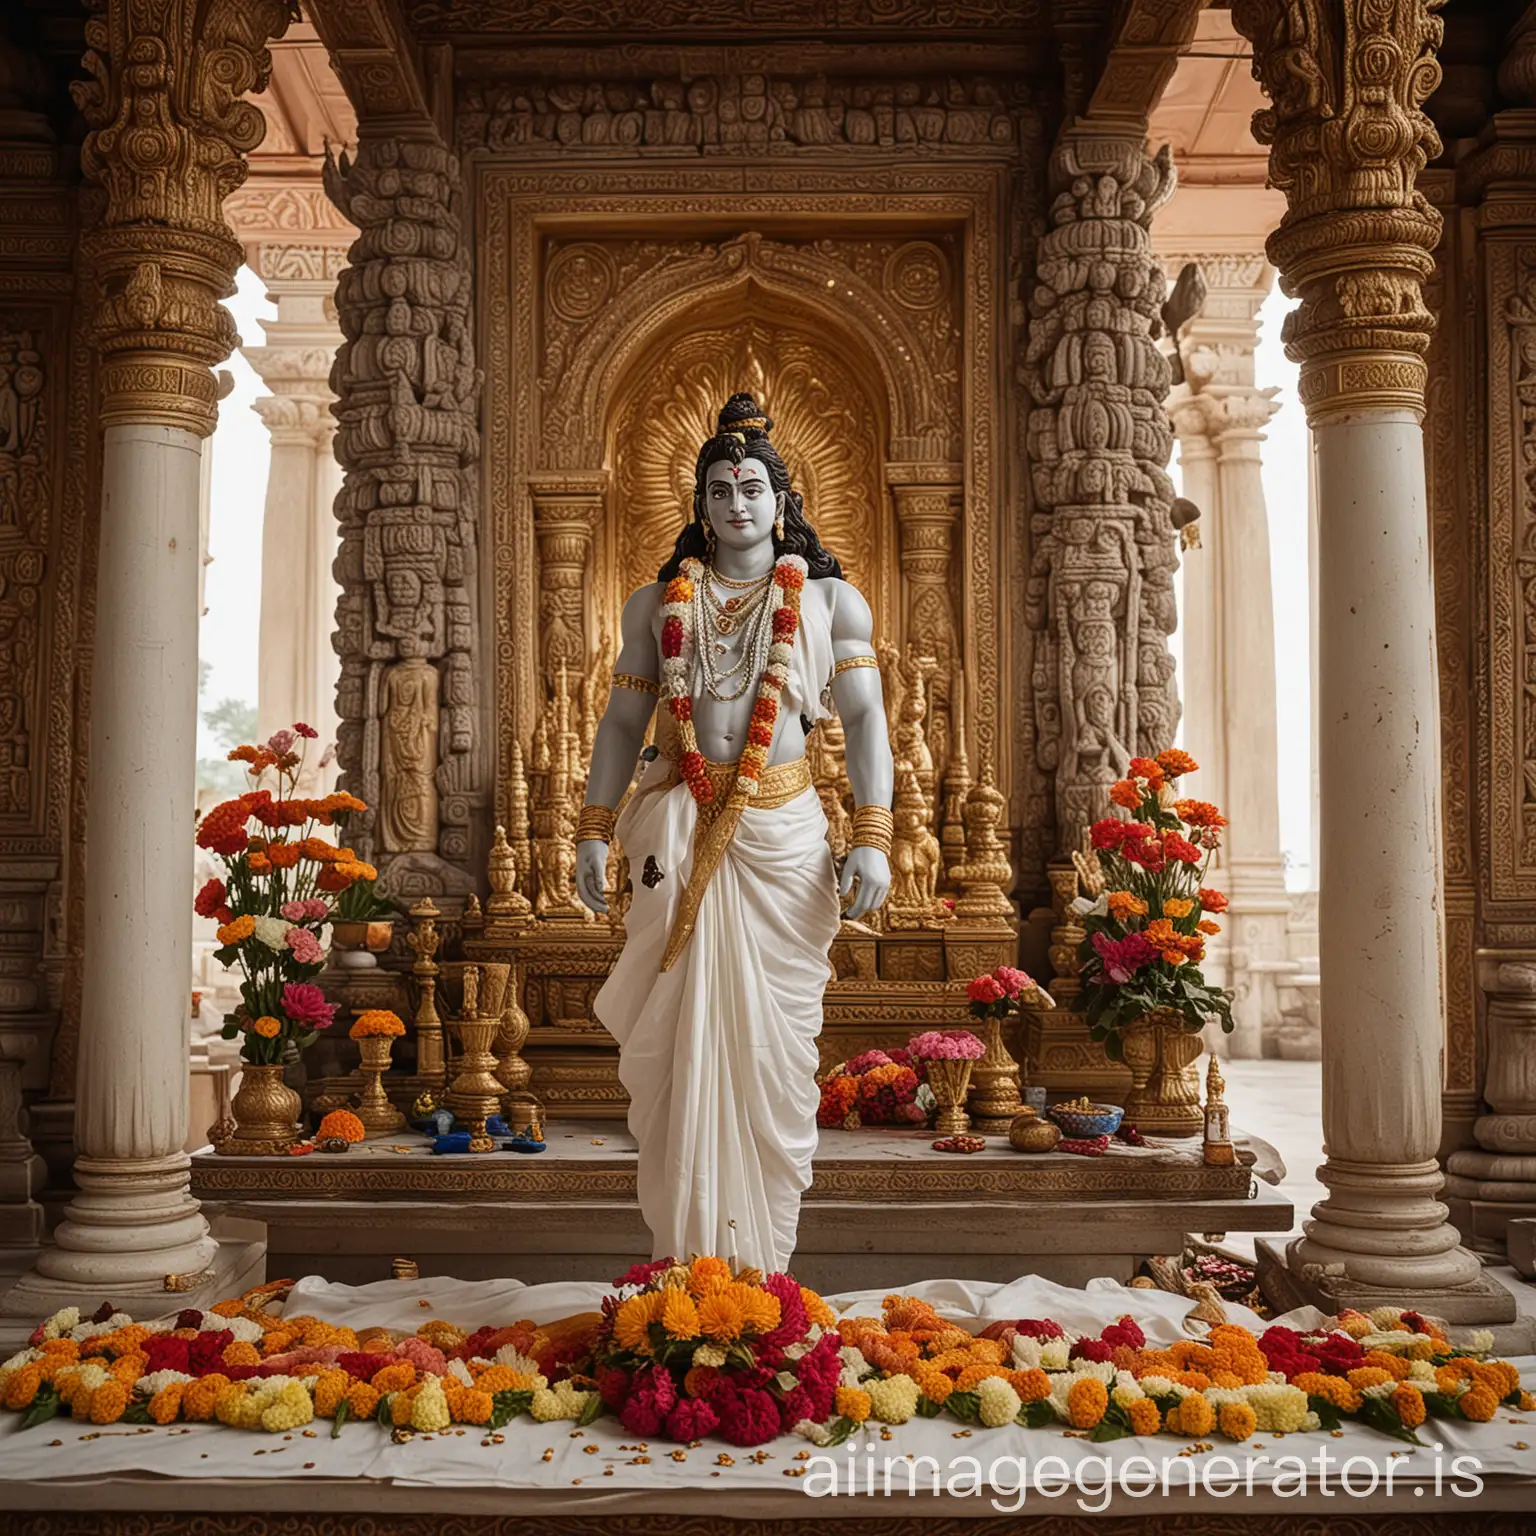 Wealthy Indian merchant performing a puja for Lord Shiva, dressed in an elegant white silk dhoti and shawl, standing in front of a beautifully decorated Shiva idol adorned with flowers and offerings, ornate temple interior with golden pillars and intricate carvings, atmosphere of devotion and reverence, Photography, taken with a Canon EOS 5D Mark IV with a 35mm f/1.4 lens, --ar 16:9 --v 5